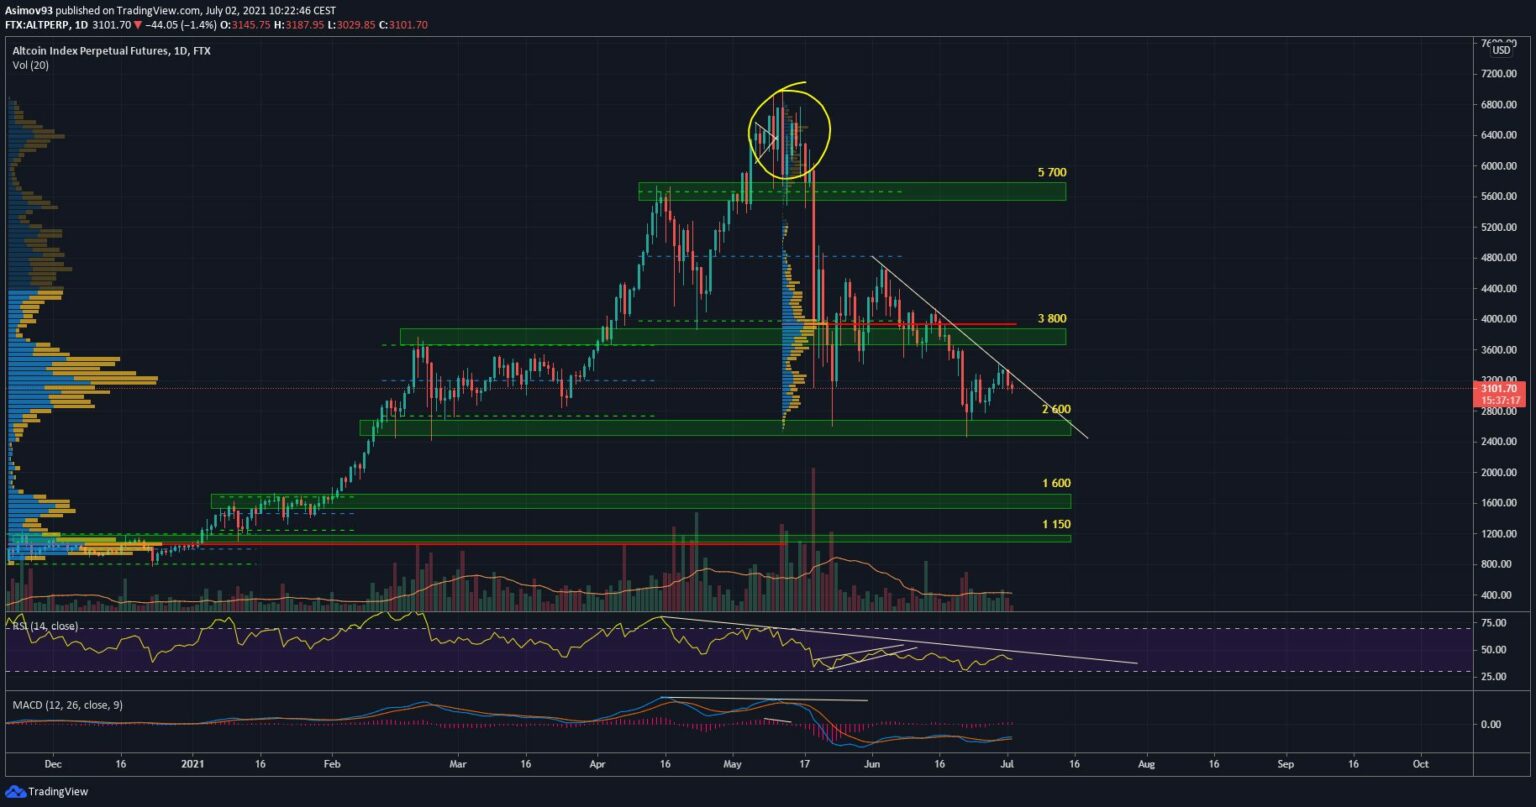 02.07.21 Technical Analysis Altcoin Index